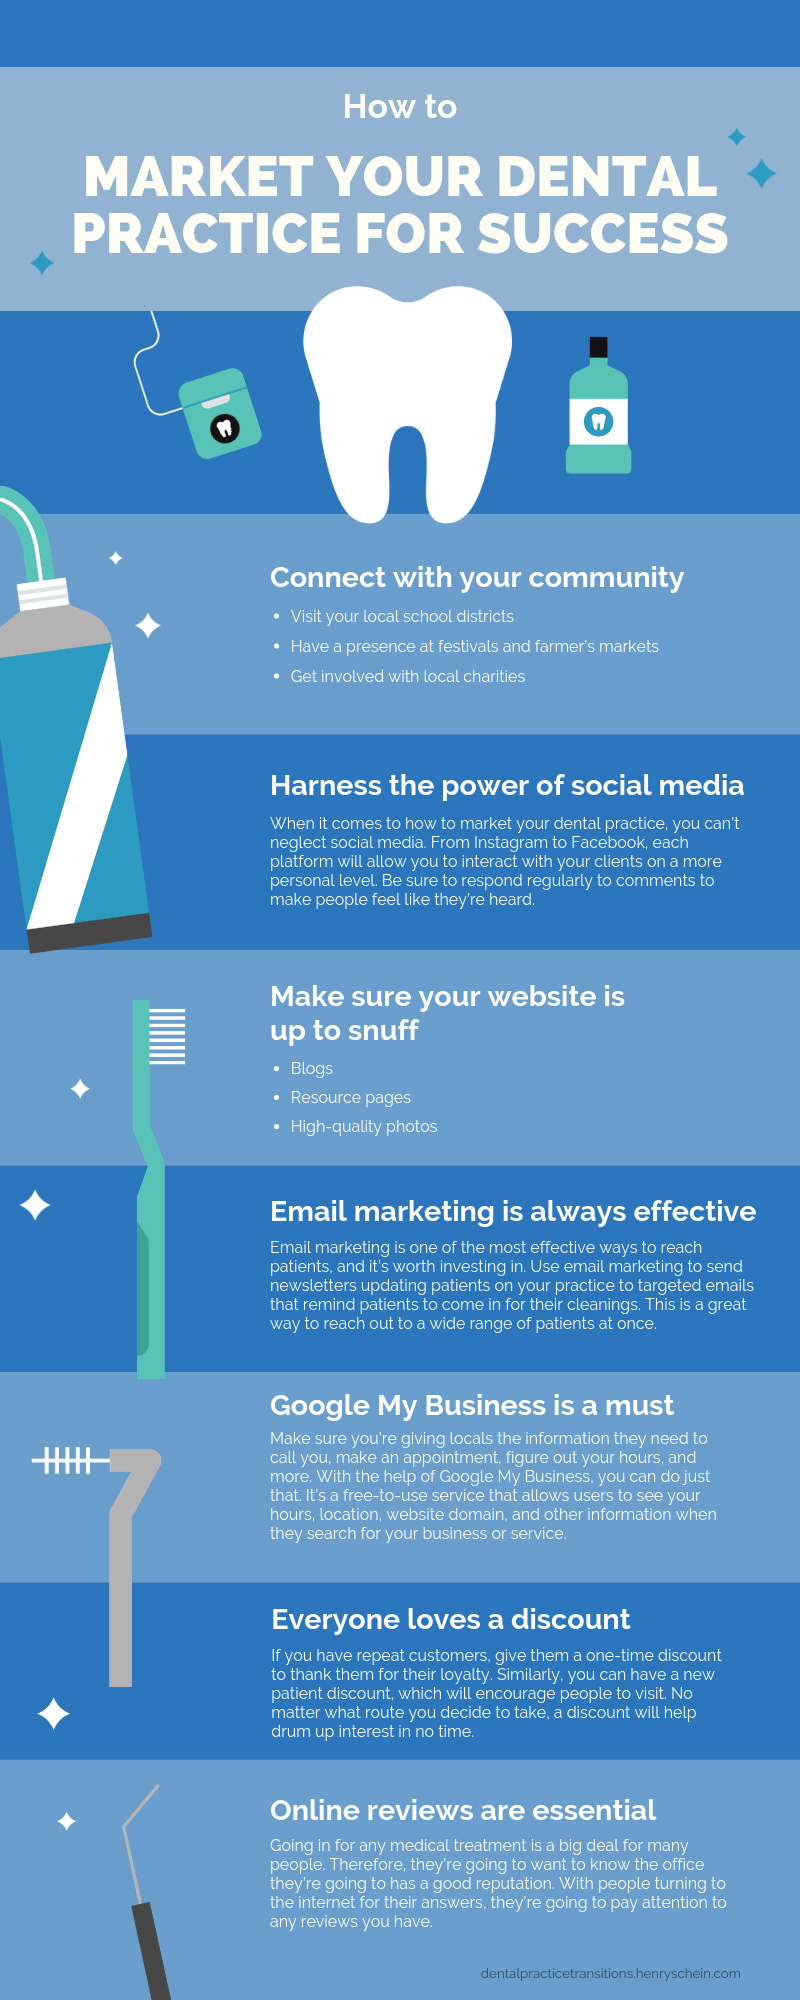 How to Market Your Dental Practice for Success infographic